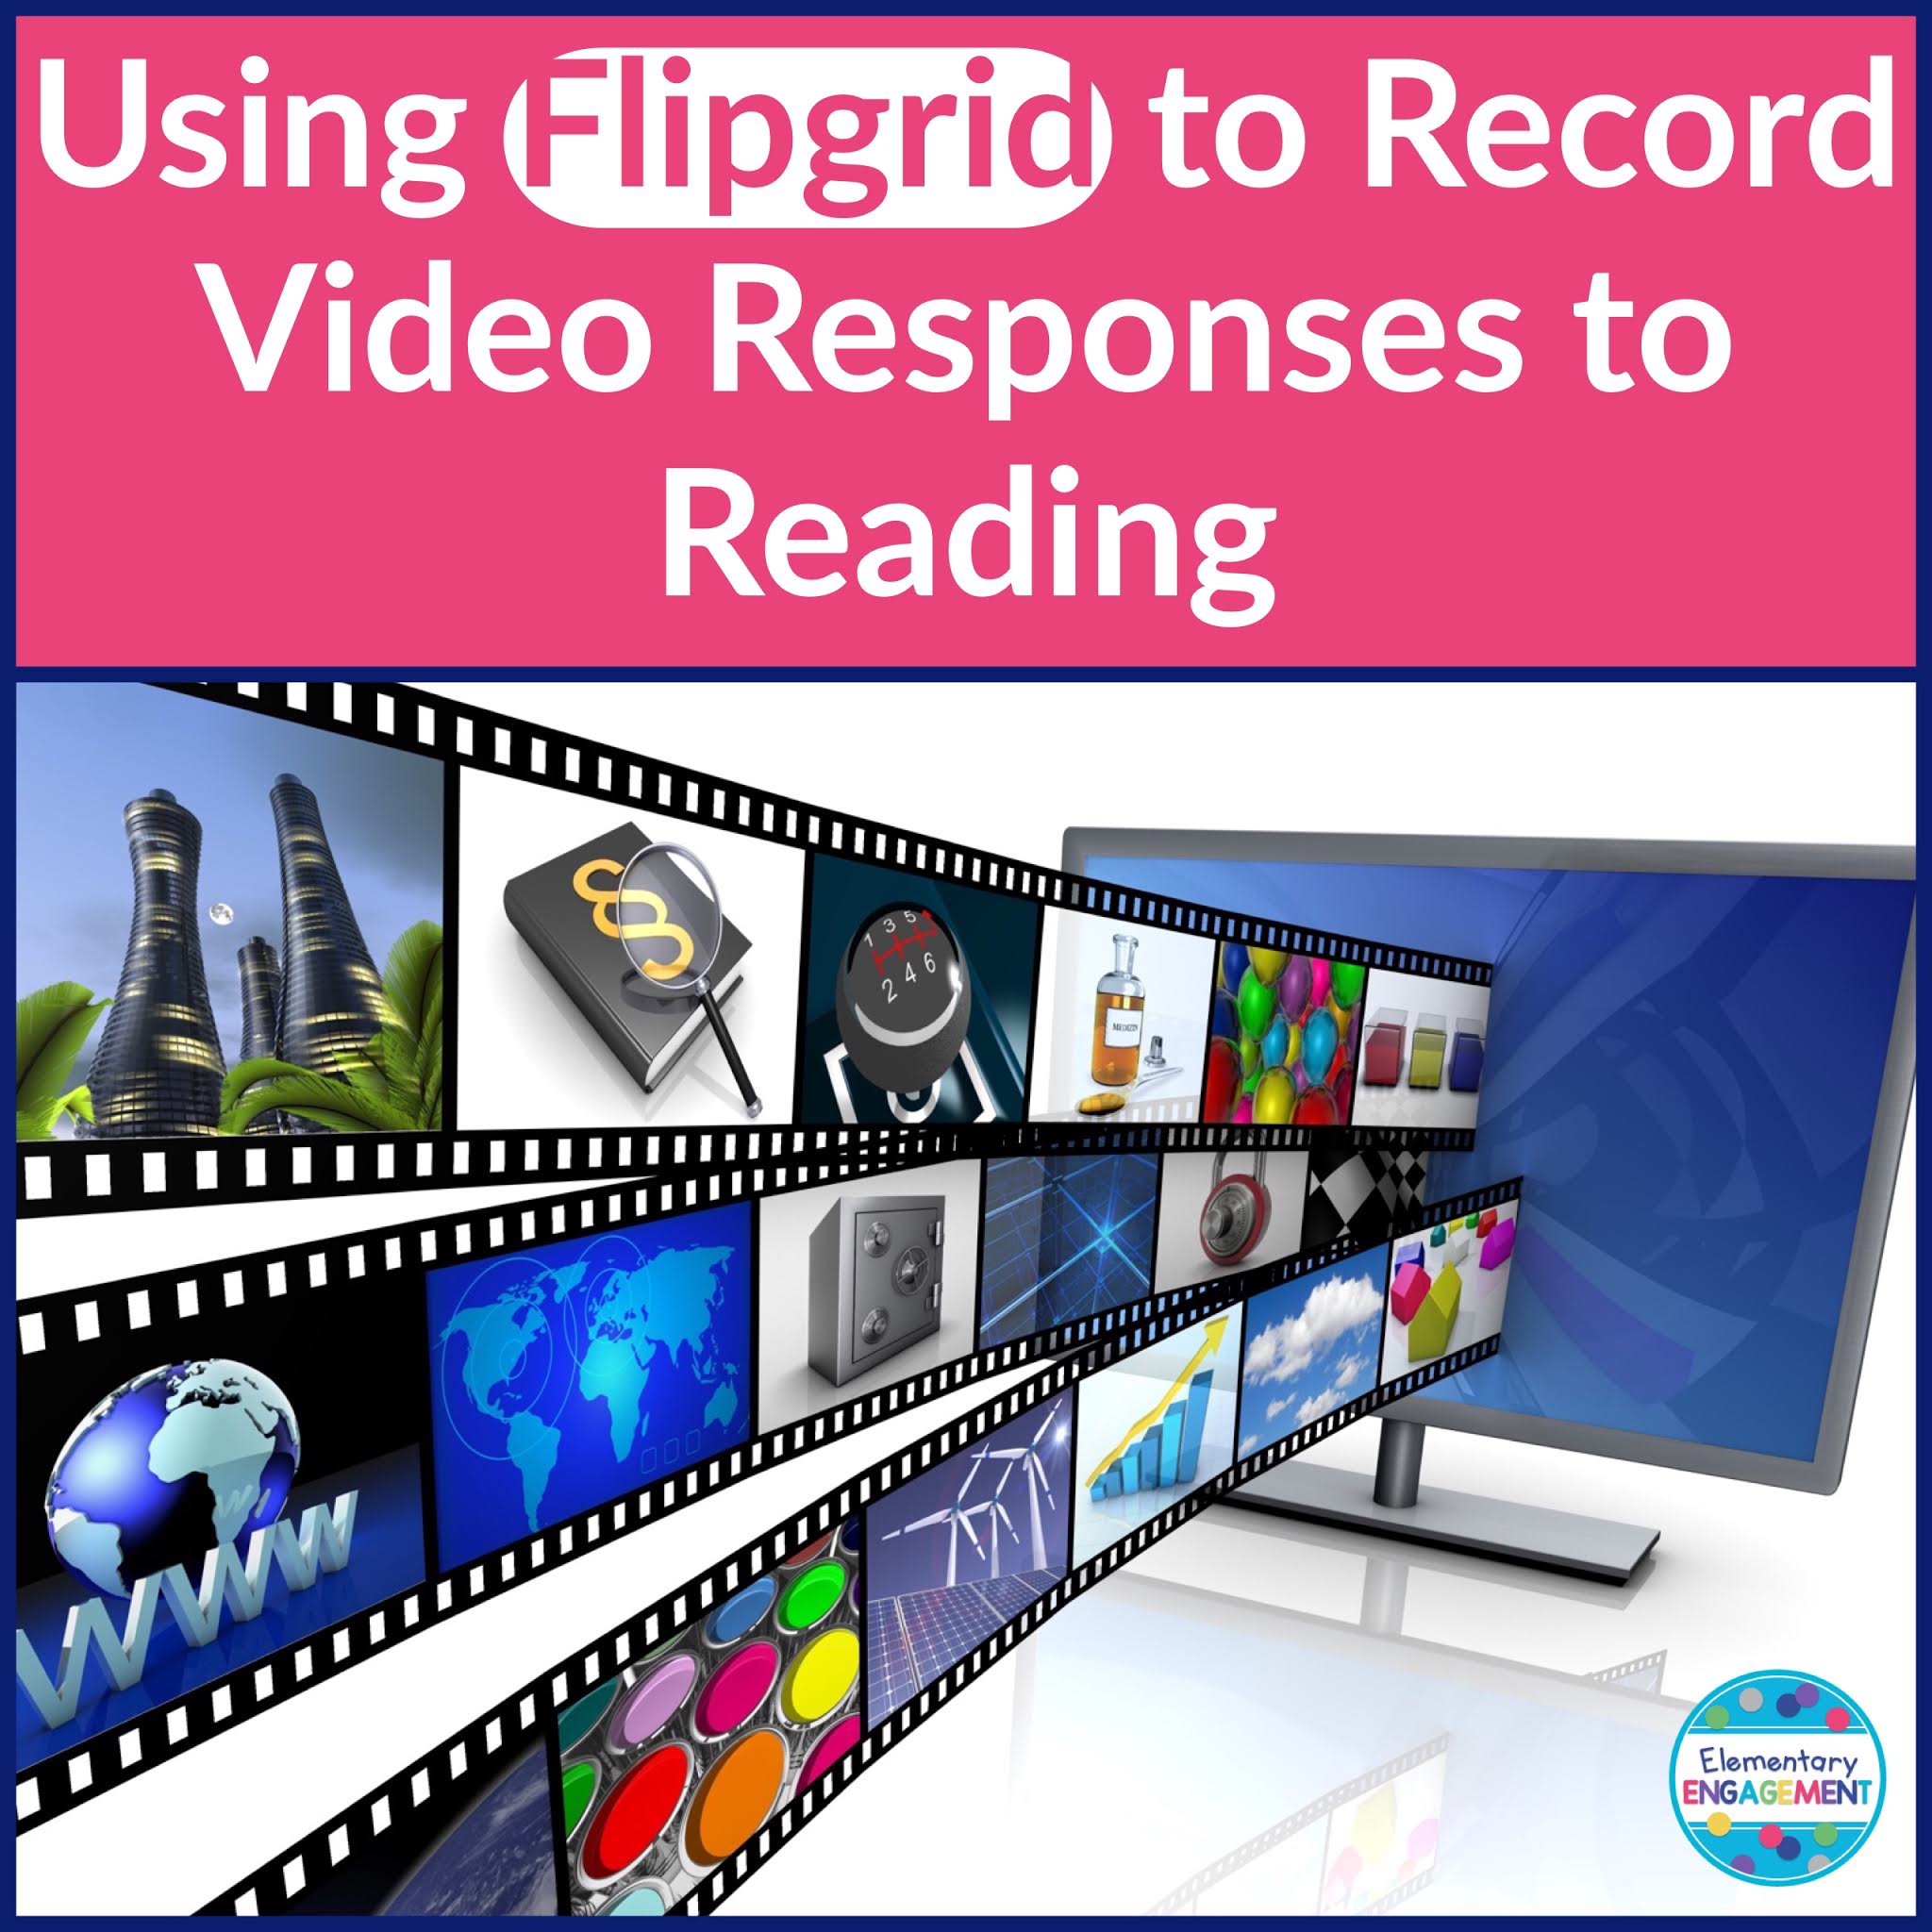 Flipgrid is an excellent way for students to record video responses to reading.